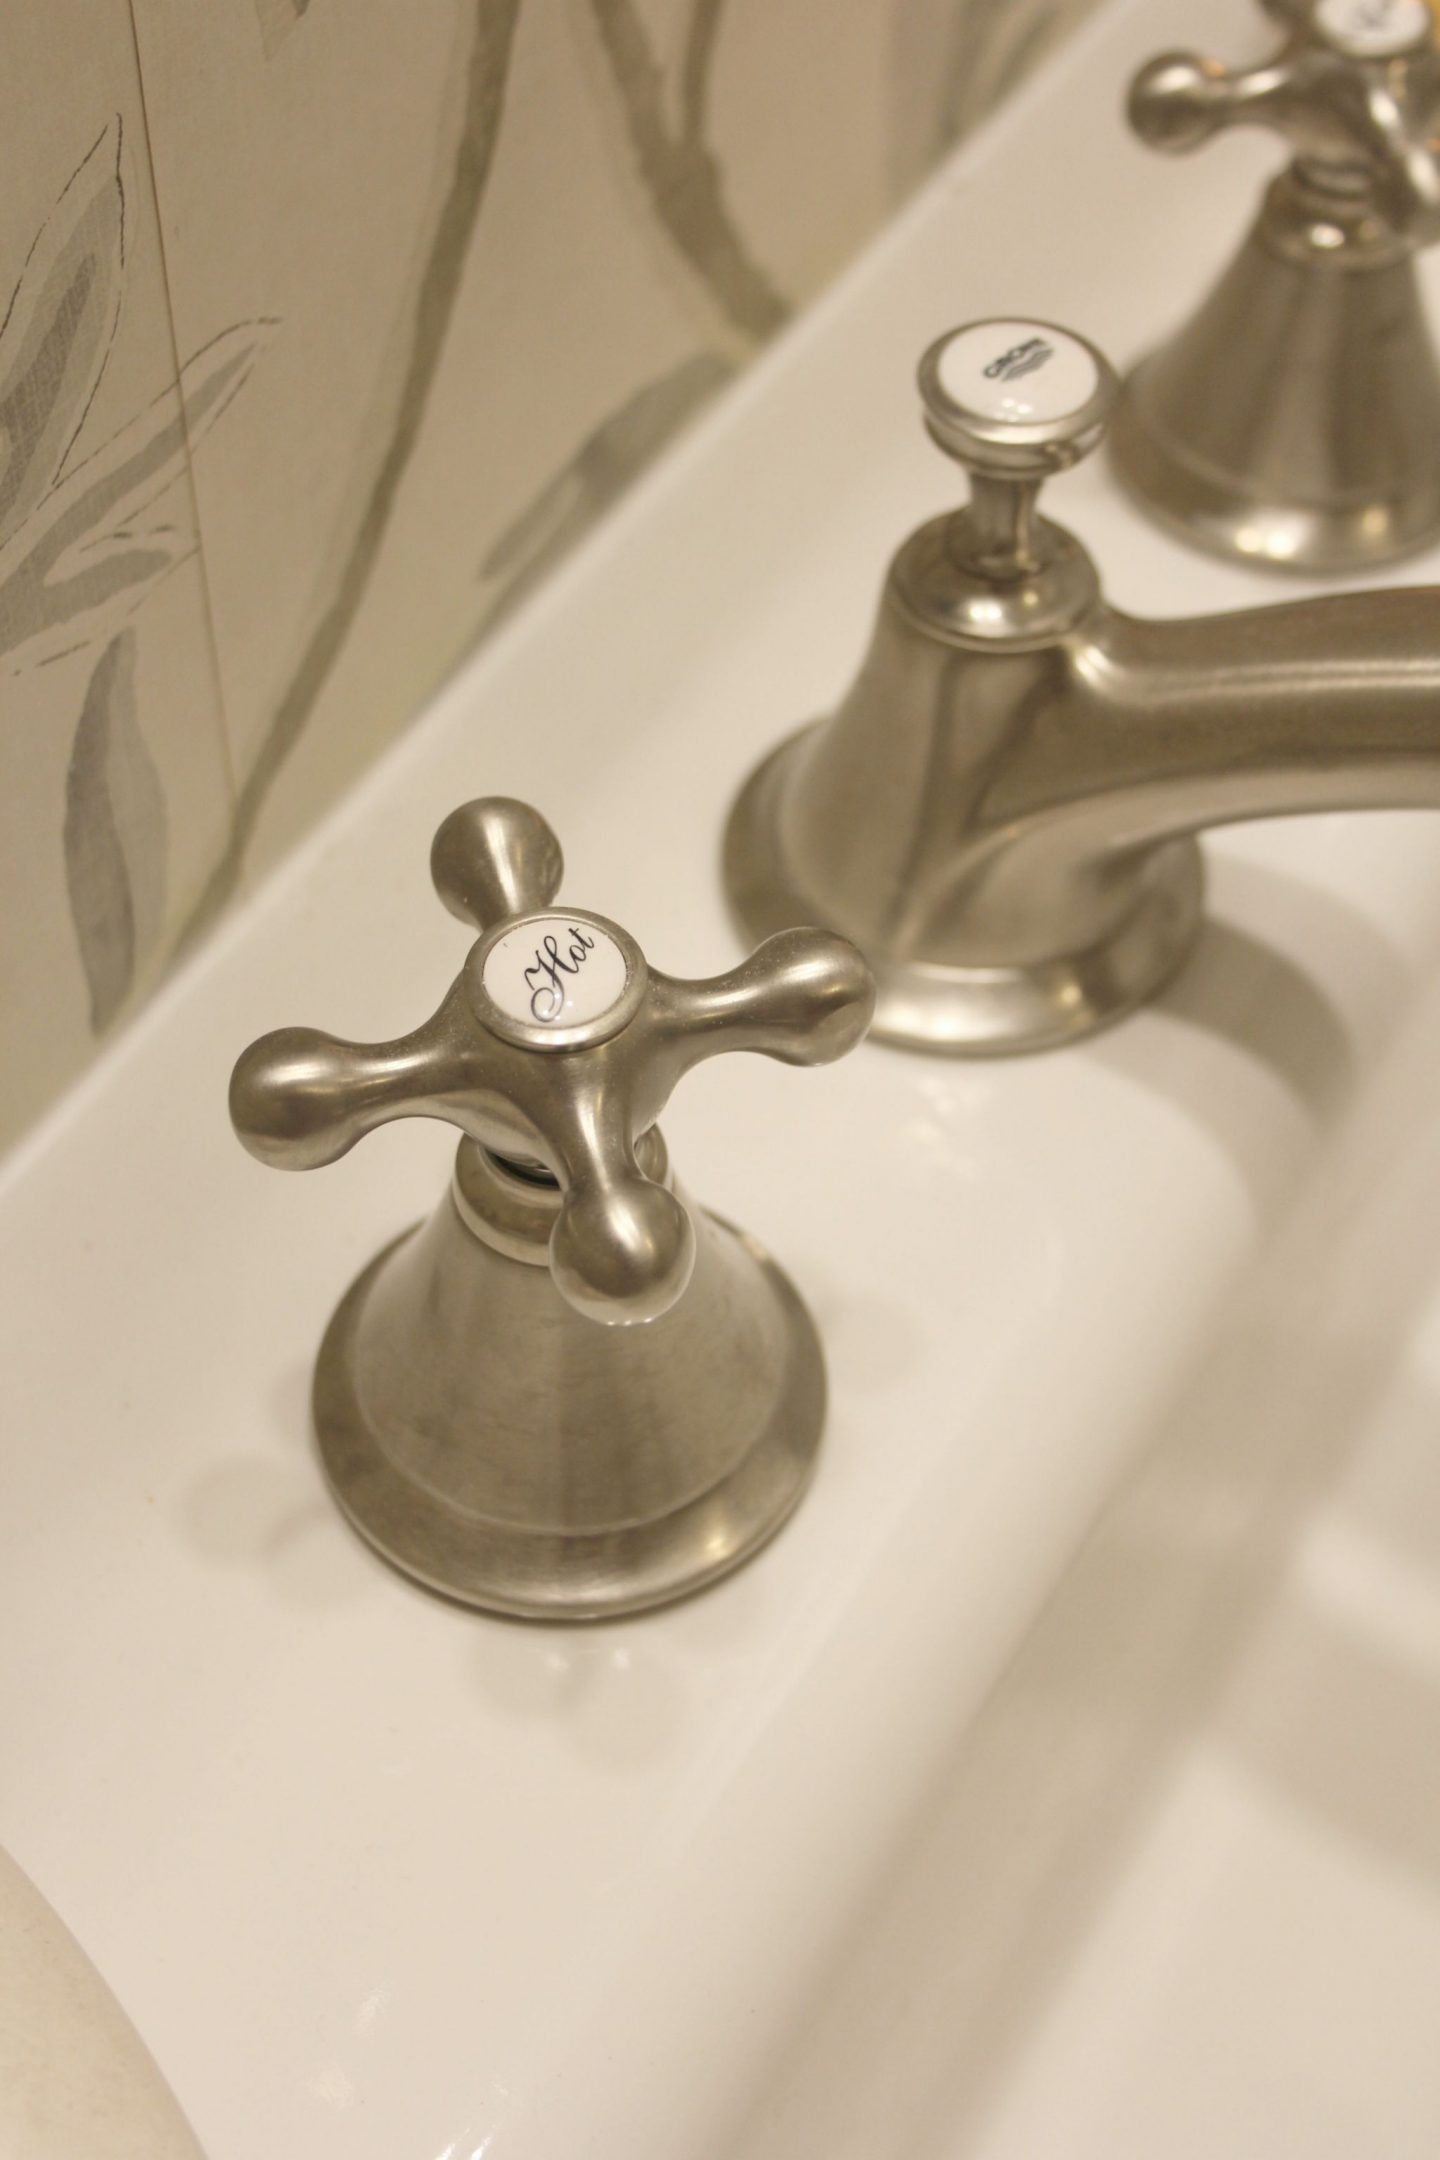 Detail of the brushed nickel widespread Seabury #bathroomfaucet by #Grohe with #crosshandles. Its classic design is perfect for a #modernfarmhouse bathroom!